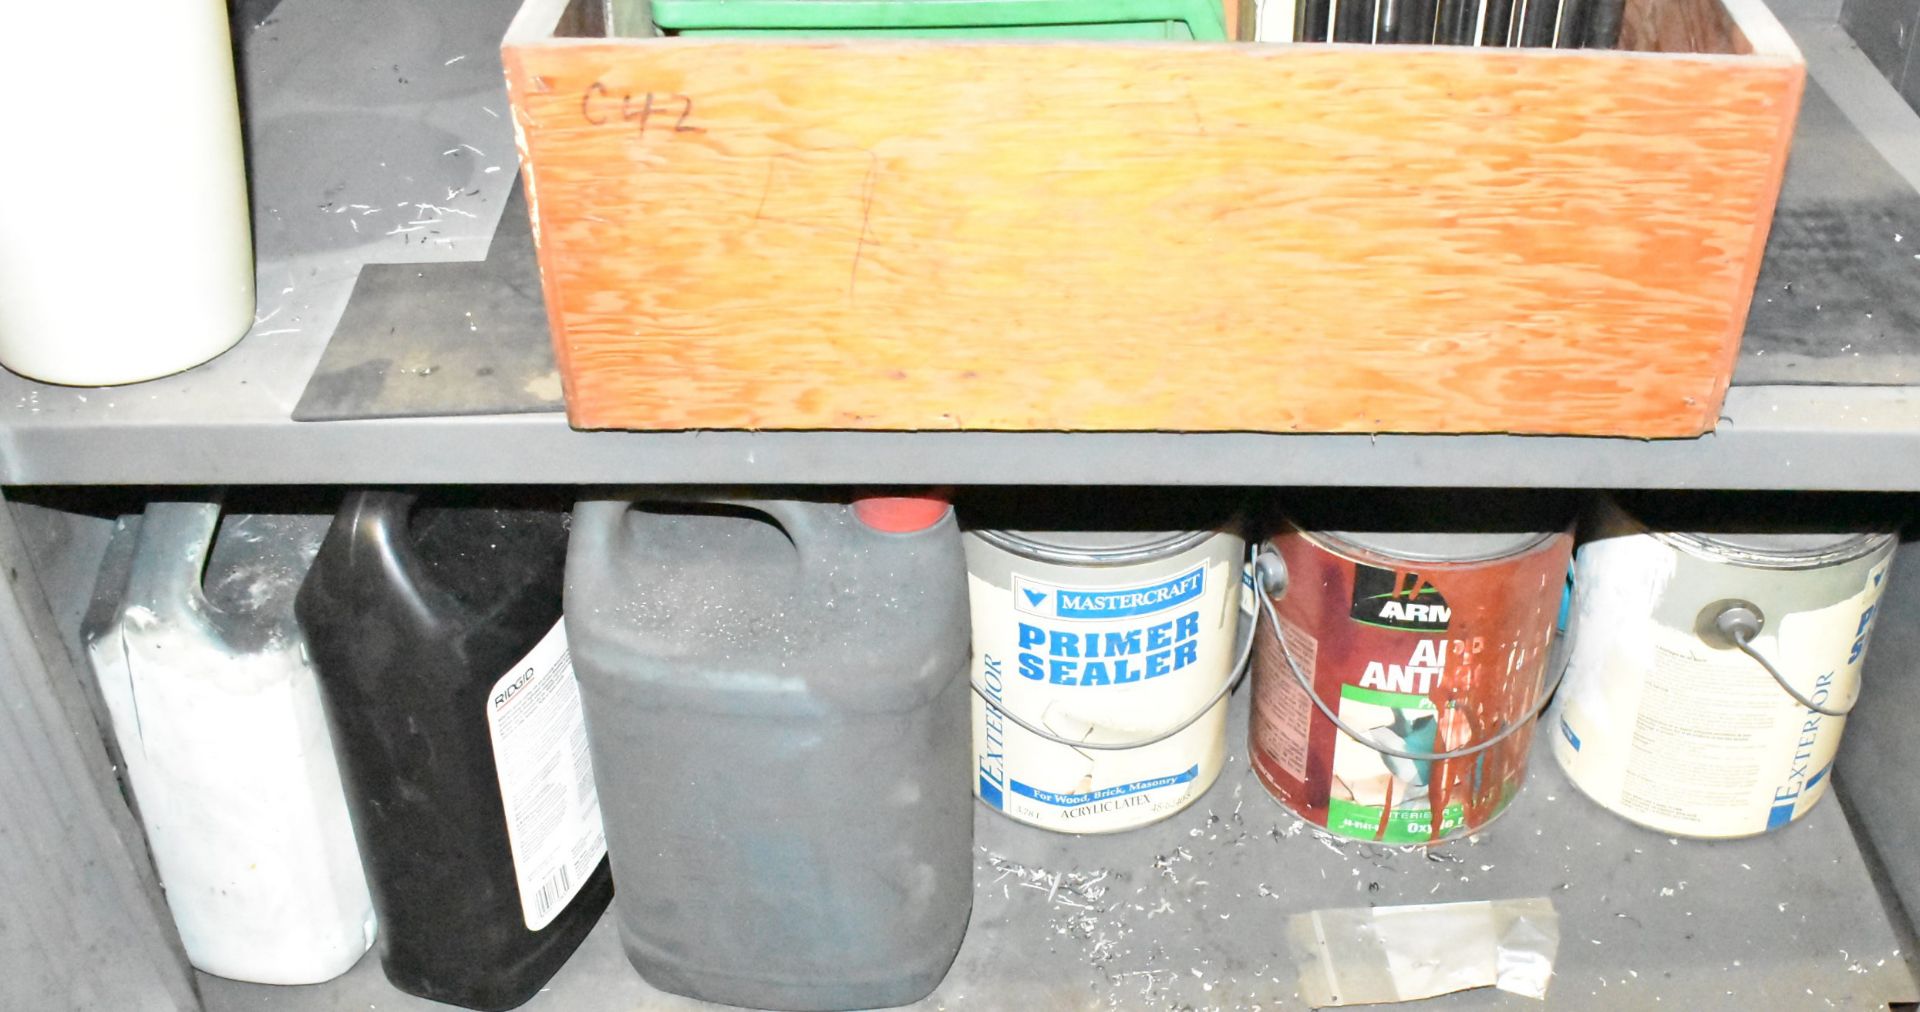 LOT/ STEEL HIGHBOY CABINET WITH CONTENTS - INCLUDING HAND TOOLS, SHOP SUPPLIES, SANDING PERISHABLES - Image 9 of 9